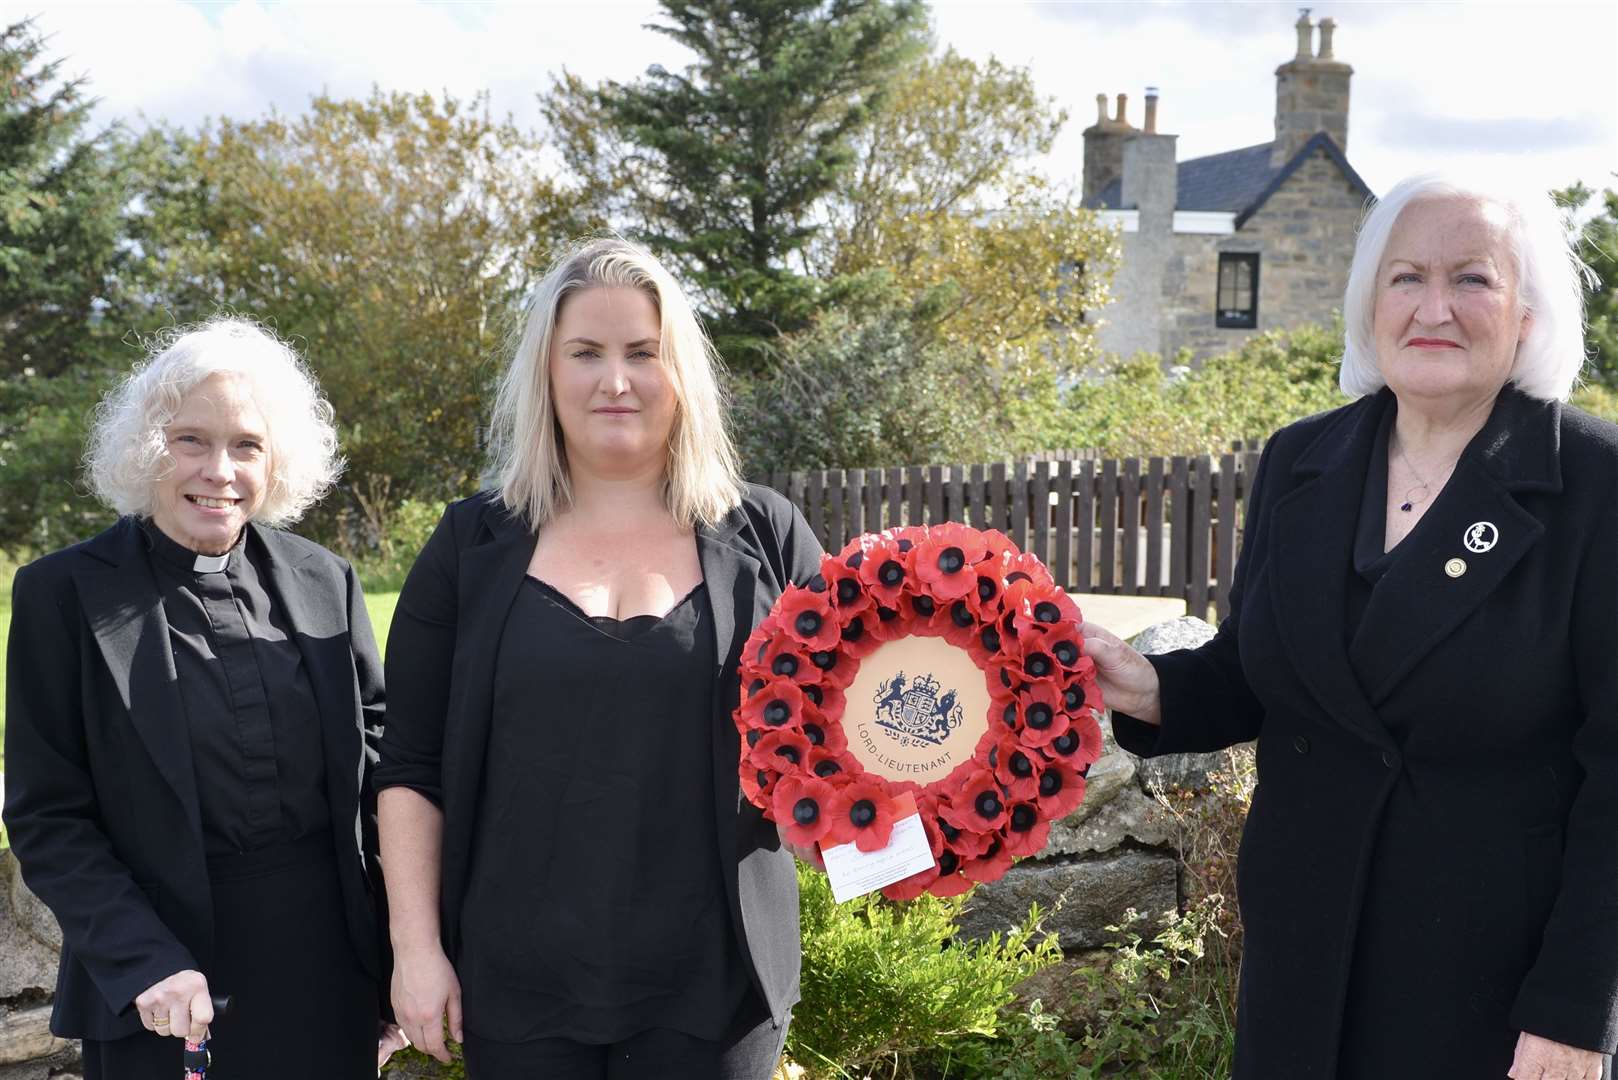 From left, Rev Dr Beverly Cushman, Altnaharra and Farr Church of Scotland, Jacqueline Gilmour, chairwoman of Bettyhill, Strathnaver and Altnaharra Community Council, and Frances Gunn, Depute Lord Lieutenant of Sutherland. Picture: Jim A Johnston